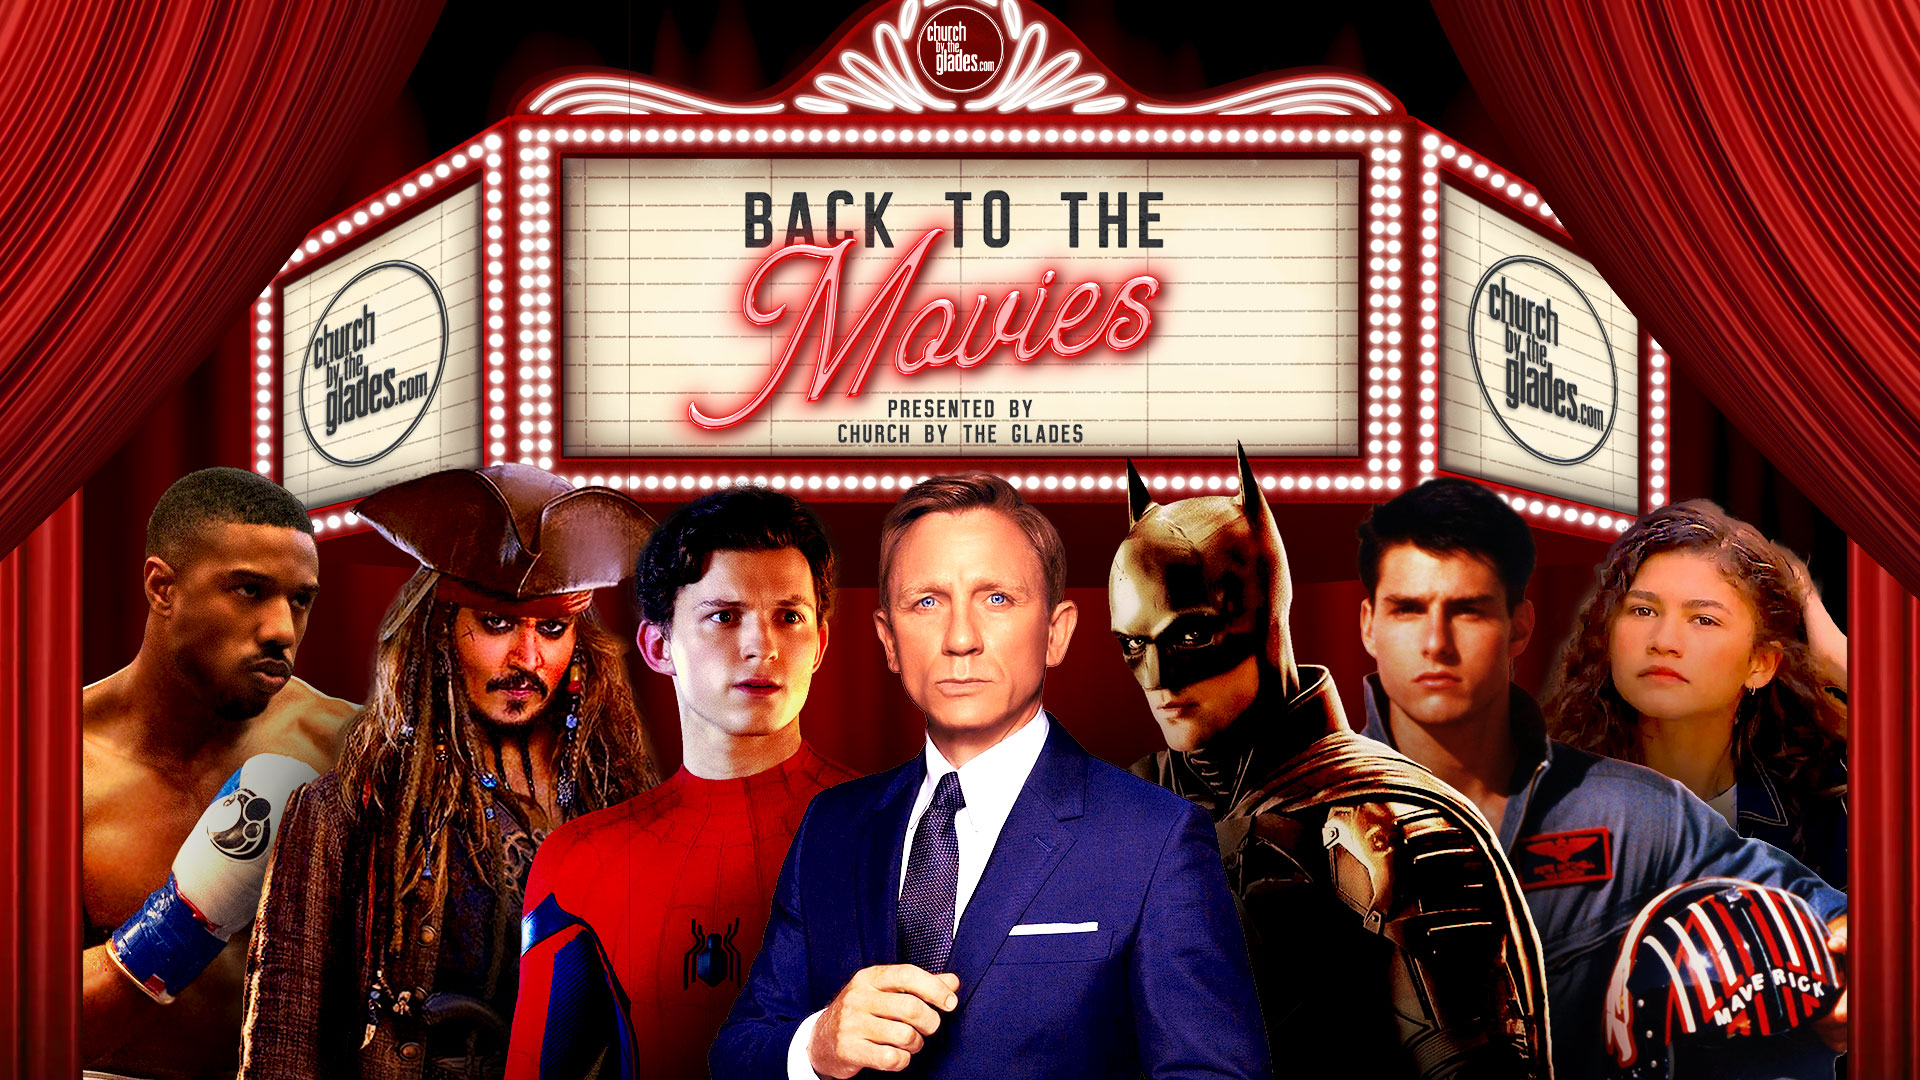    Back to the Movies